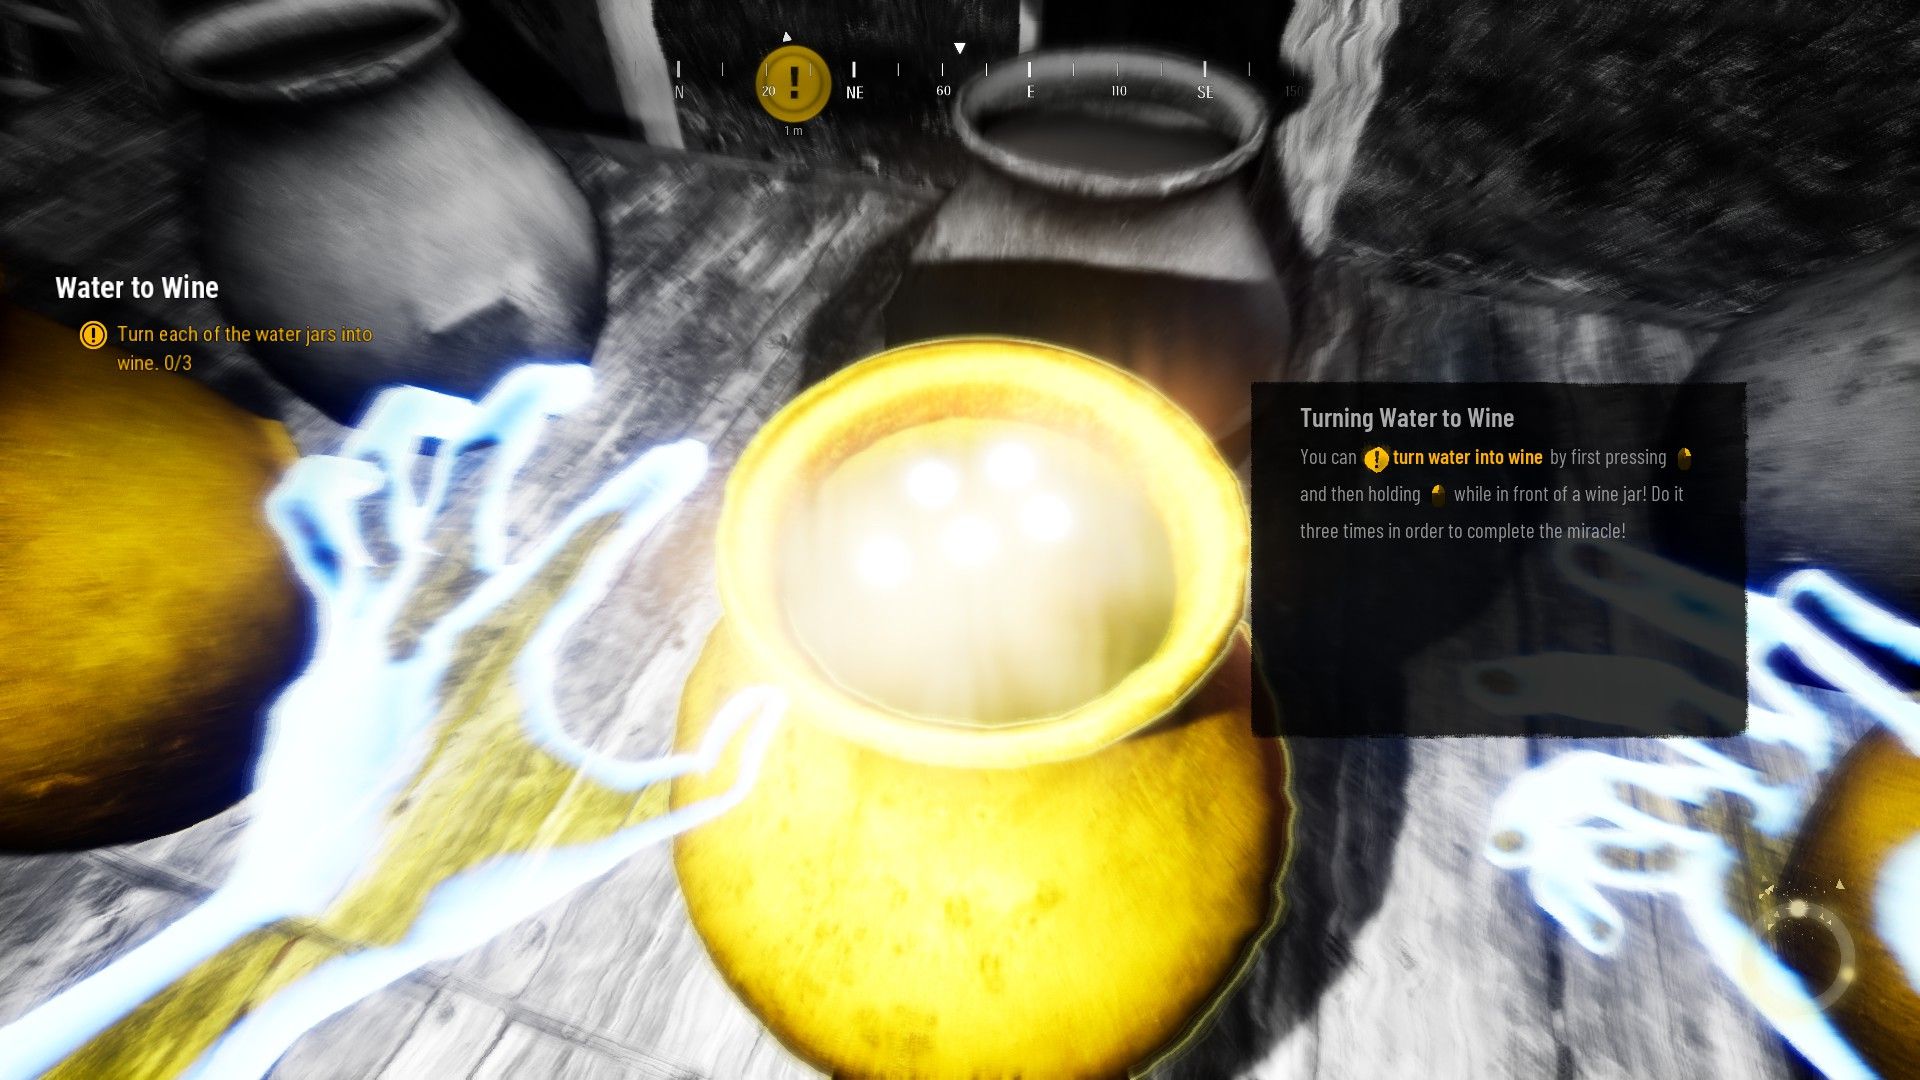 Video game screenshot showing a man's hands over a jar of water. The player is being prompted to press a button to turn it into wine